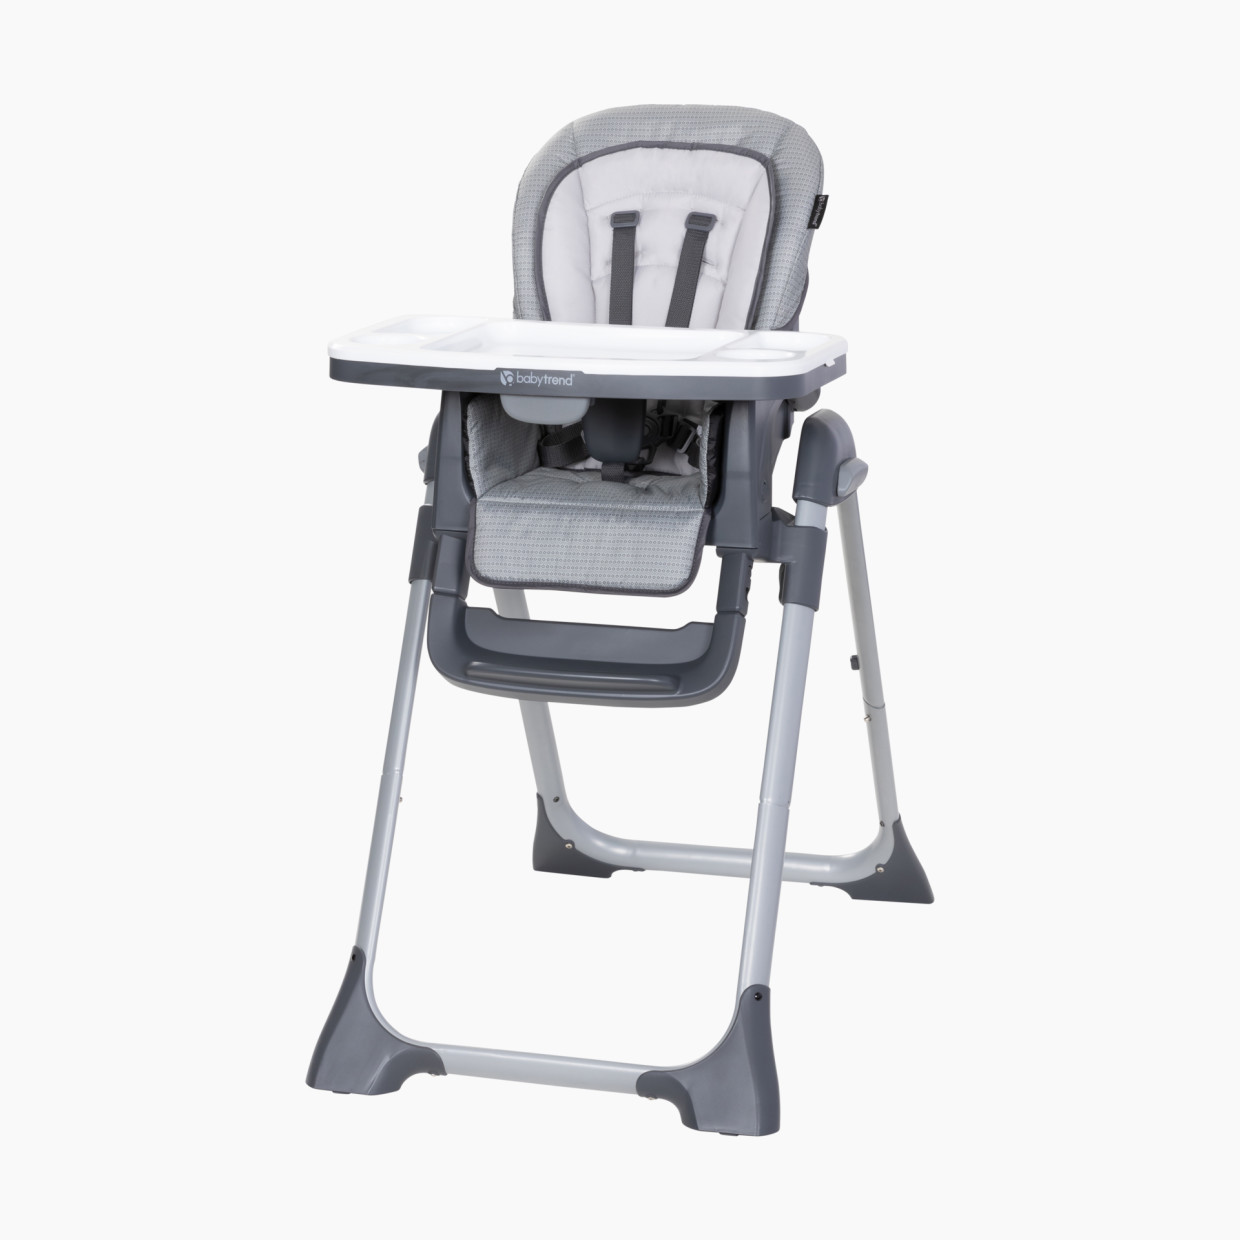 Baby Trend Sit Right 2.0 3-in-1 High Chair - Cozy Grey.